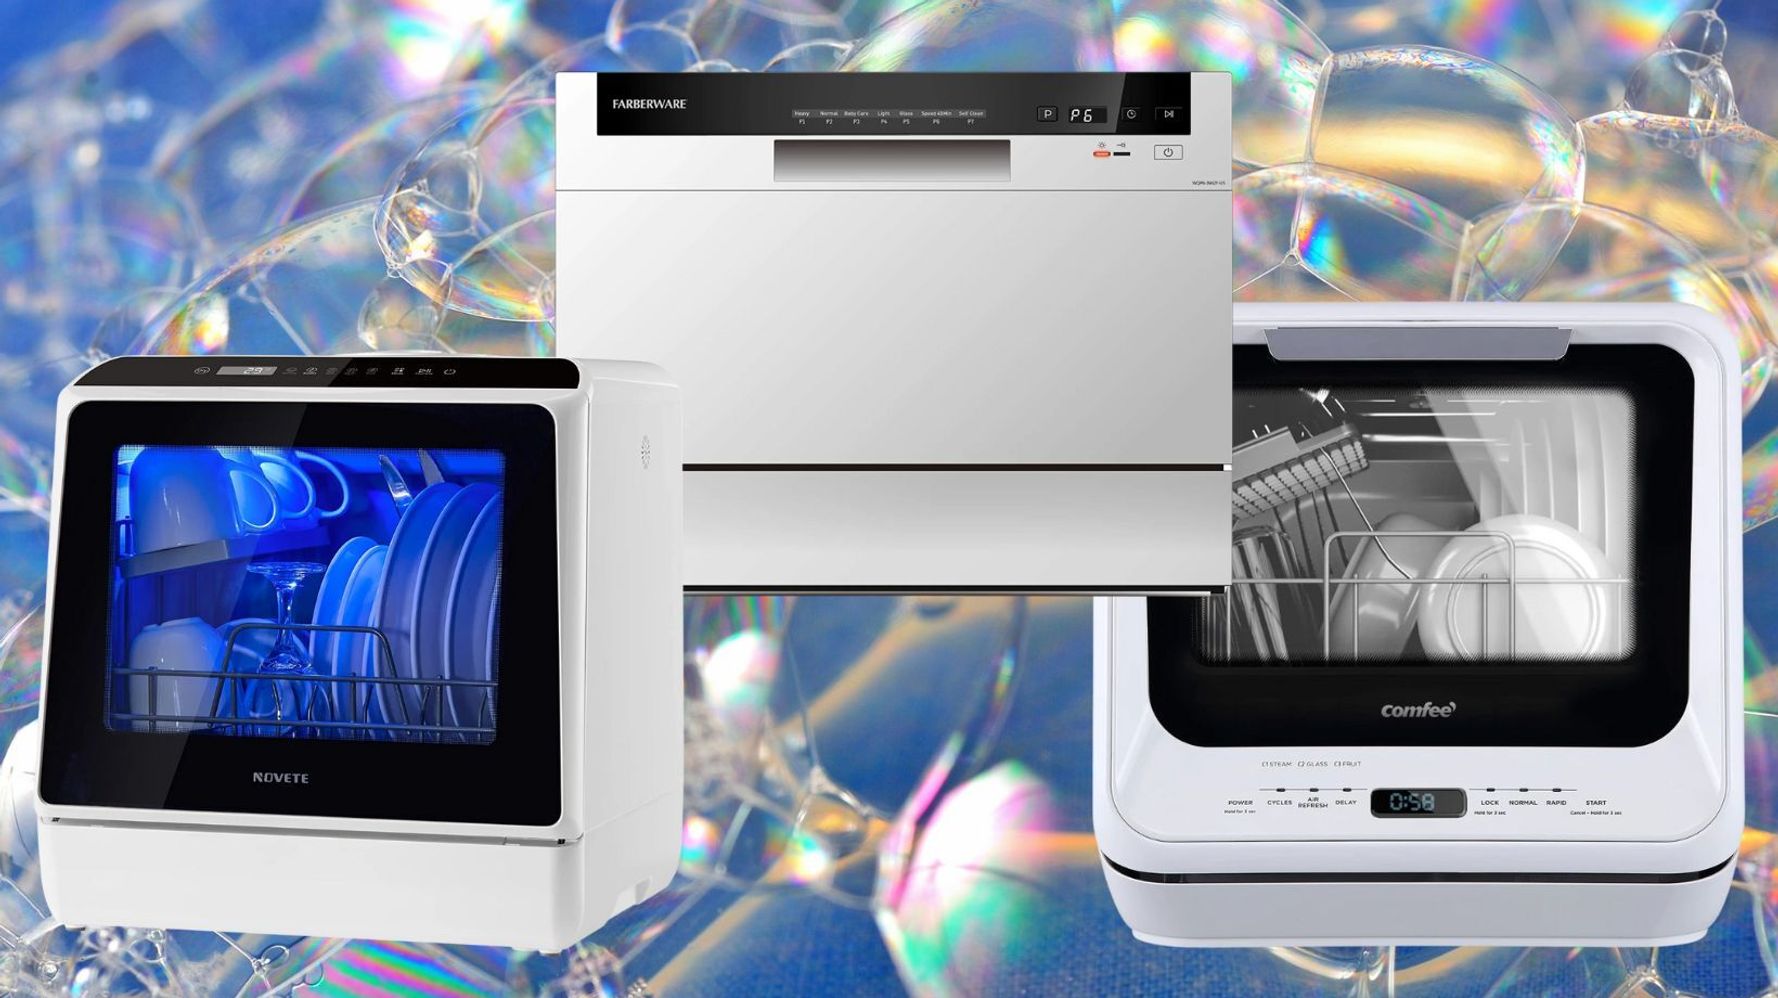 How To Install A Dishwasher - Even If You're Not A Plumbing Genius